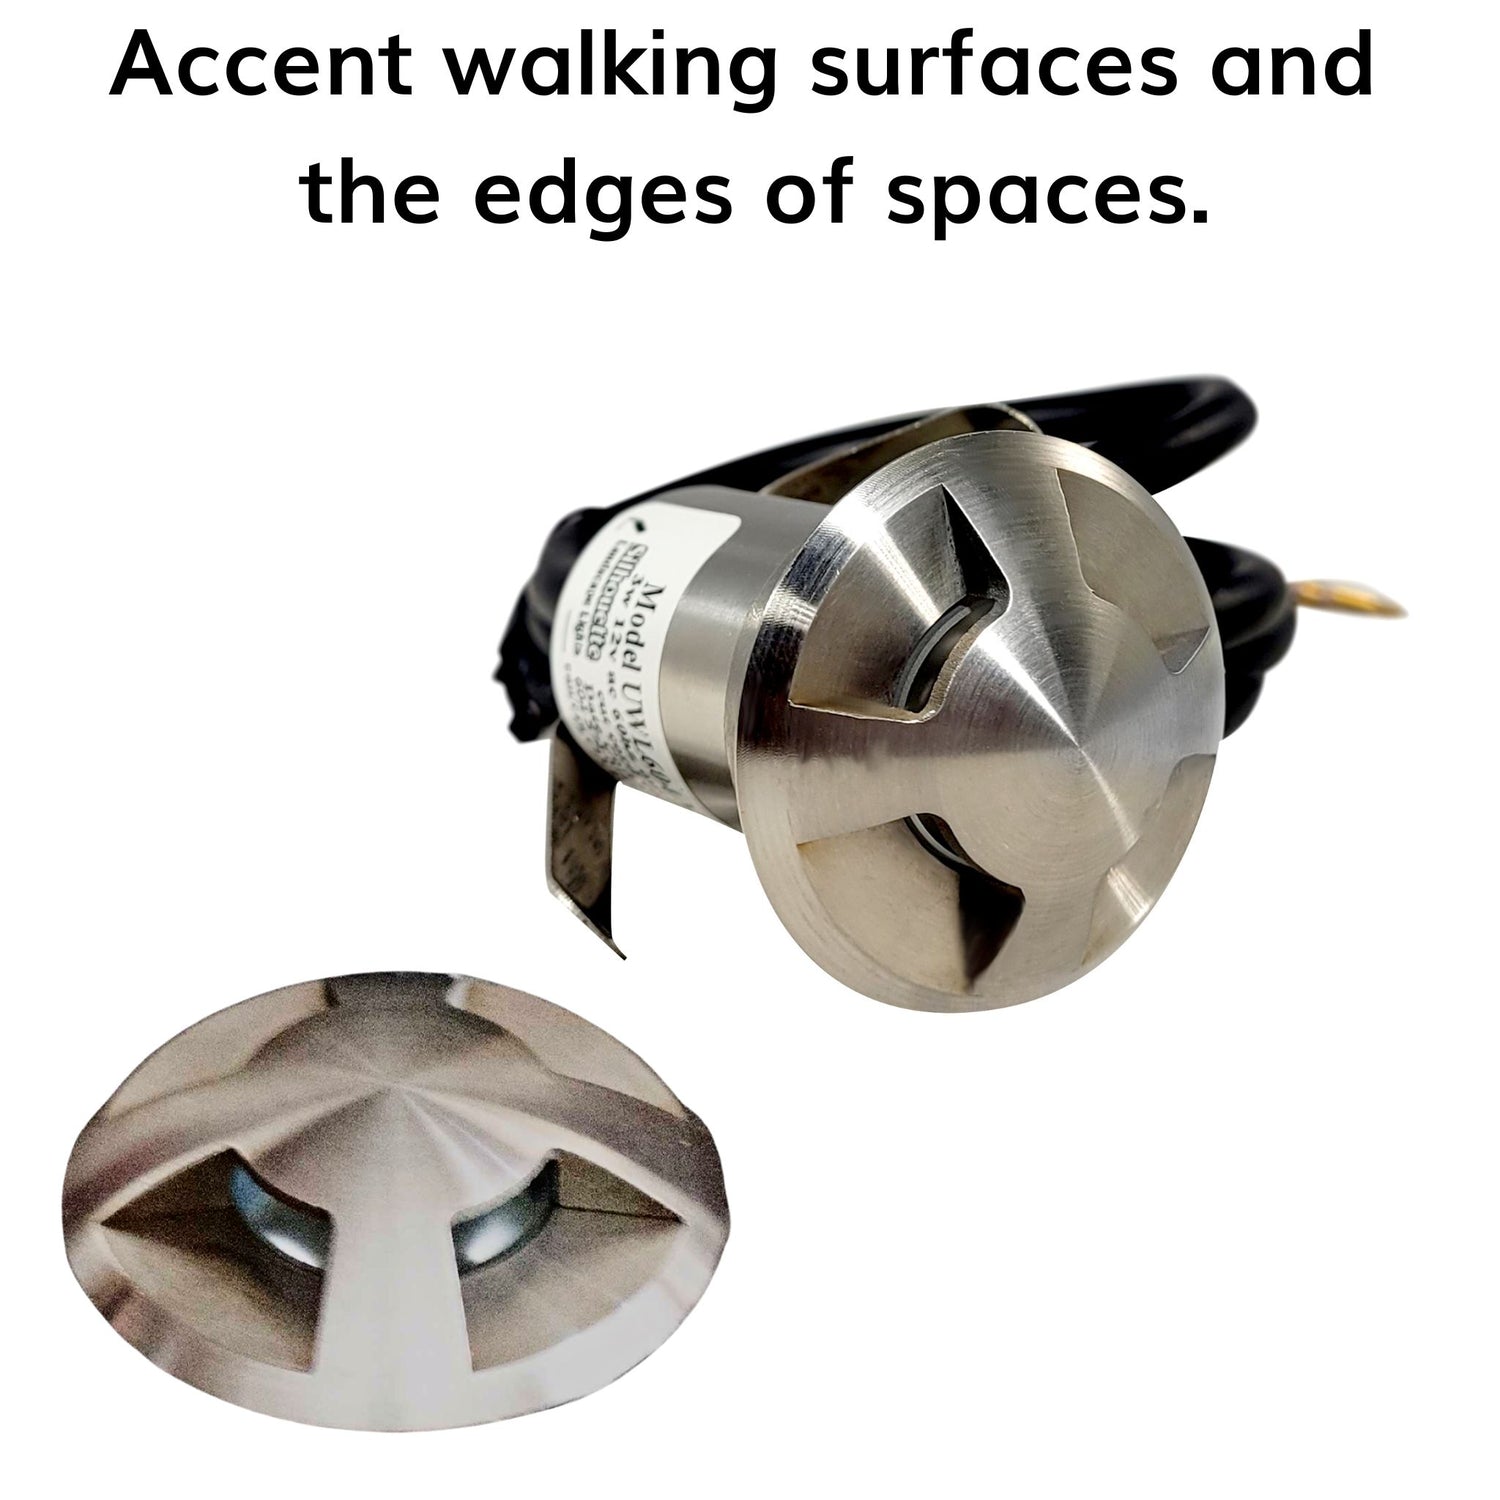 Define and accent the edges of walking surfaces and spaces with LED Marker Lights.